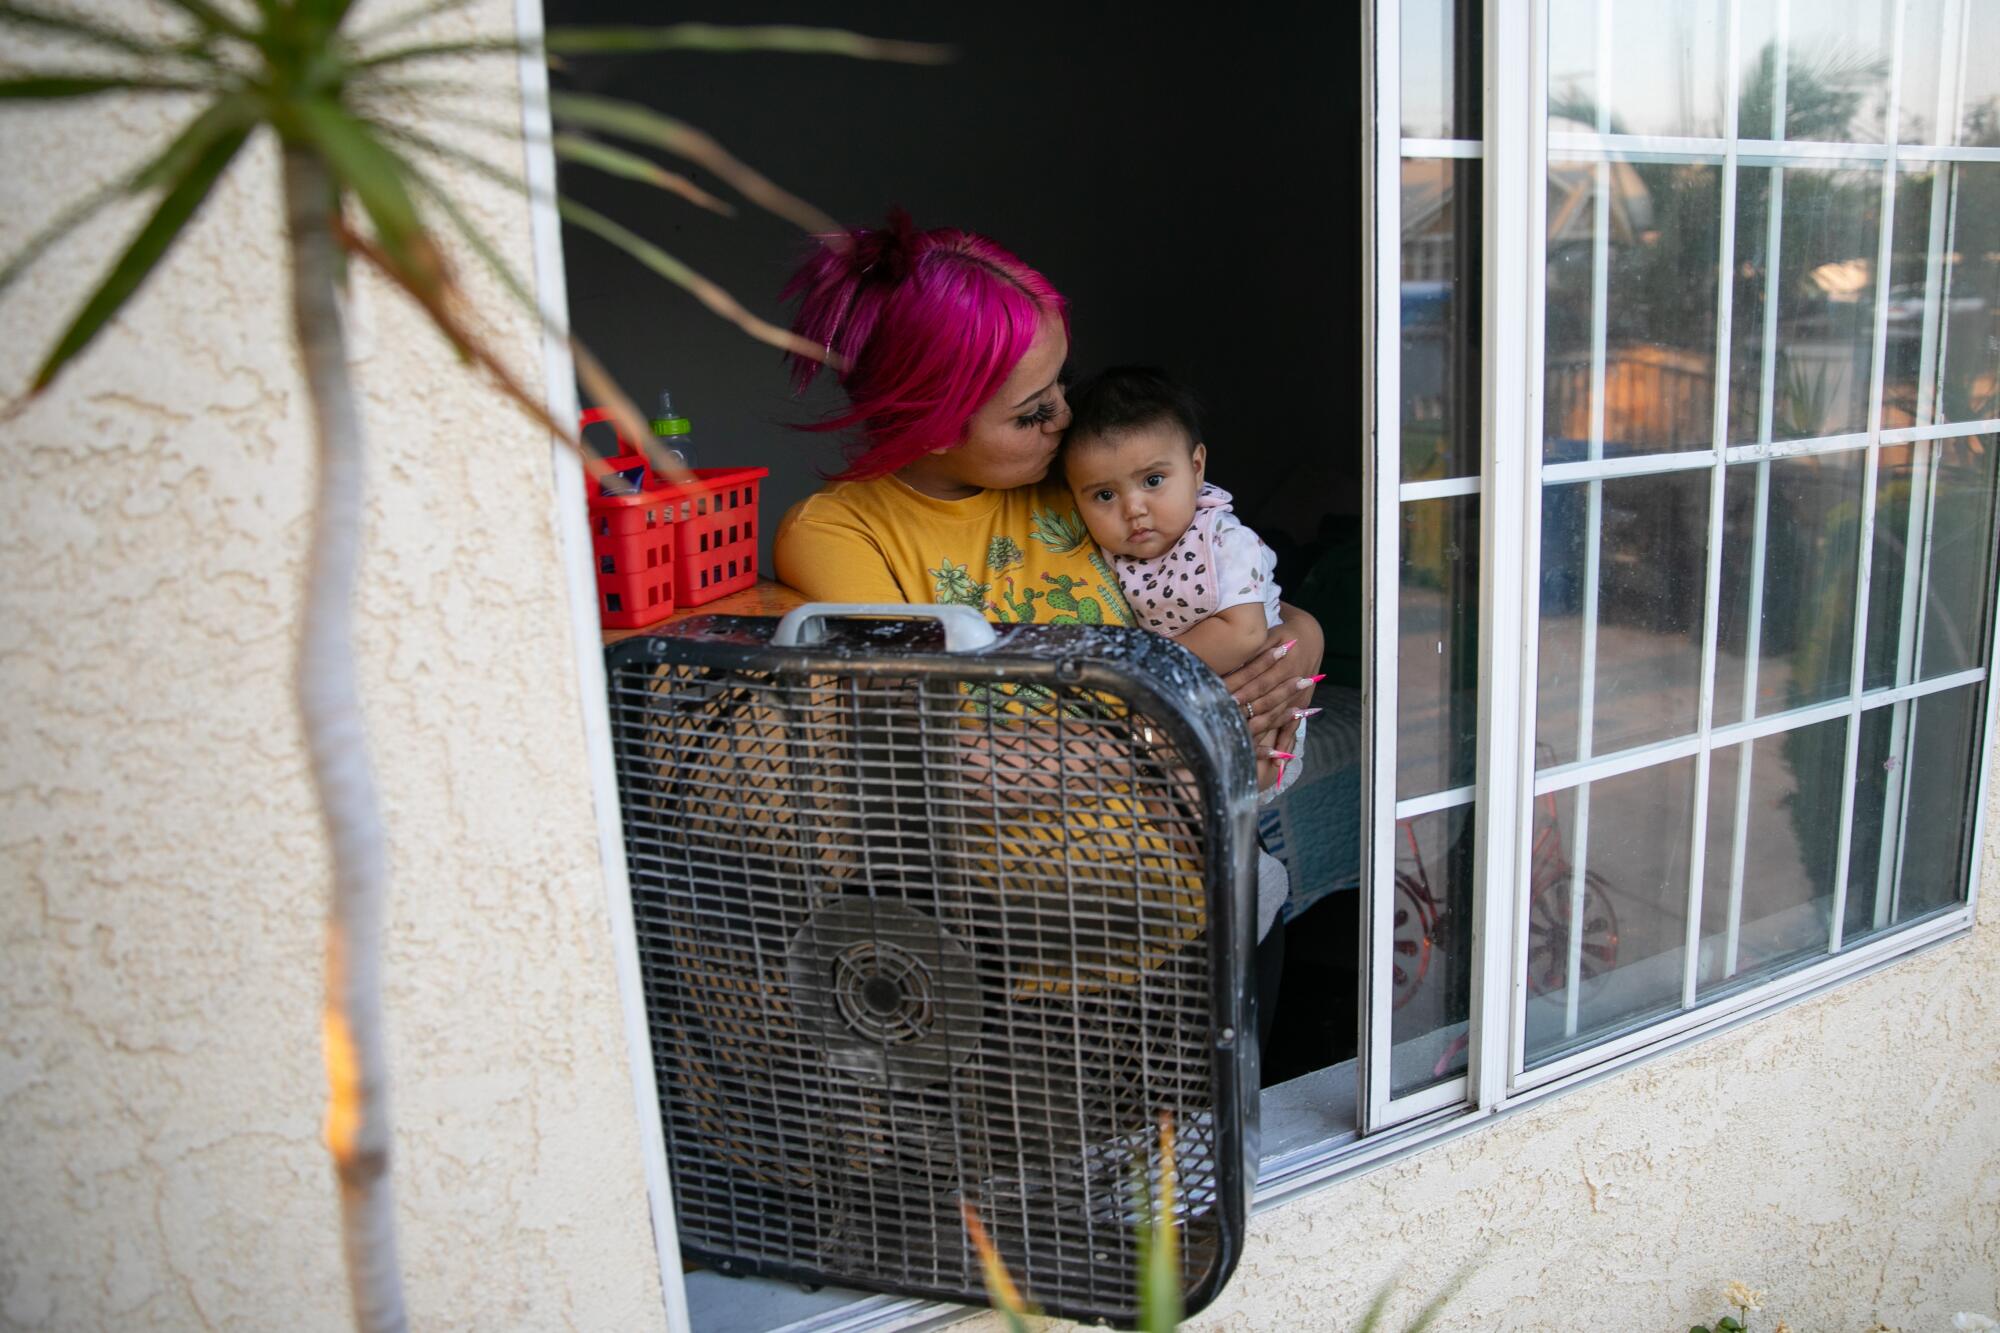 A woman holds an infant in front of an open window.